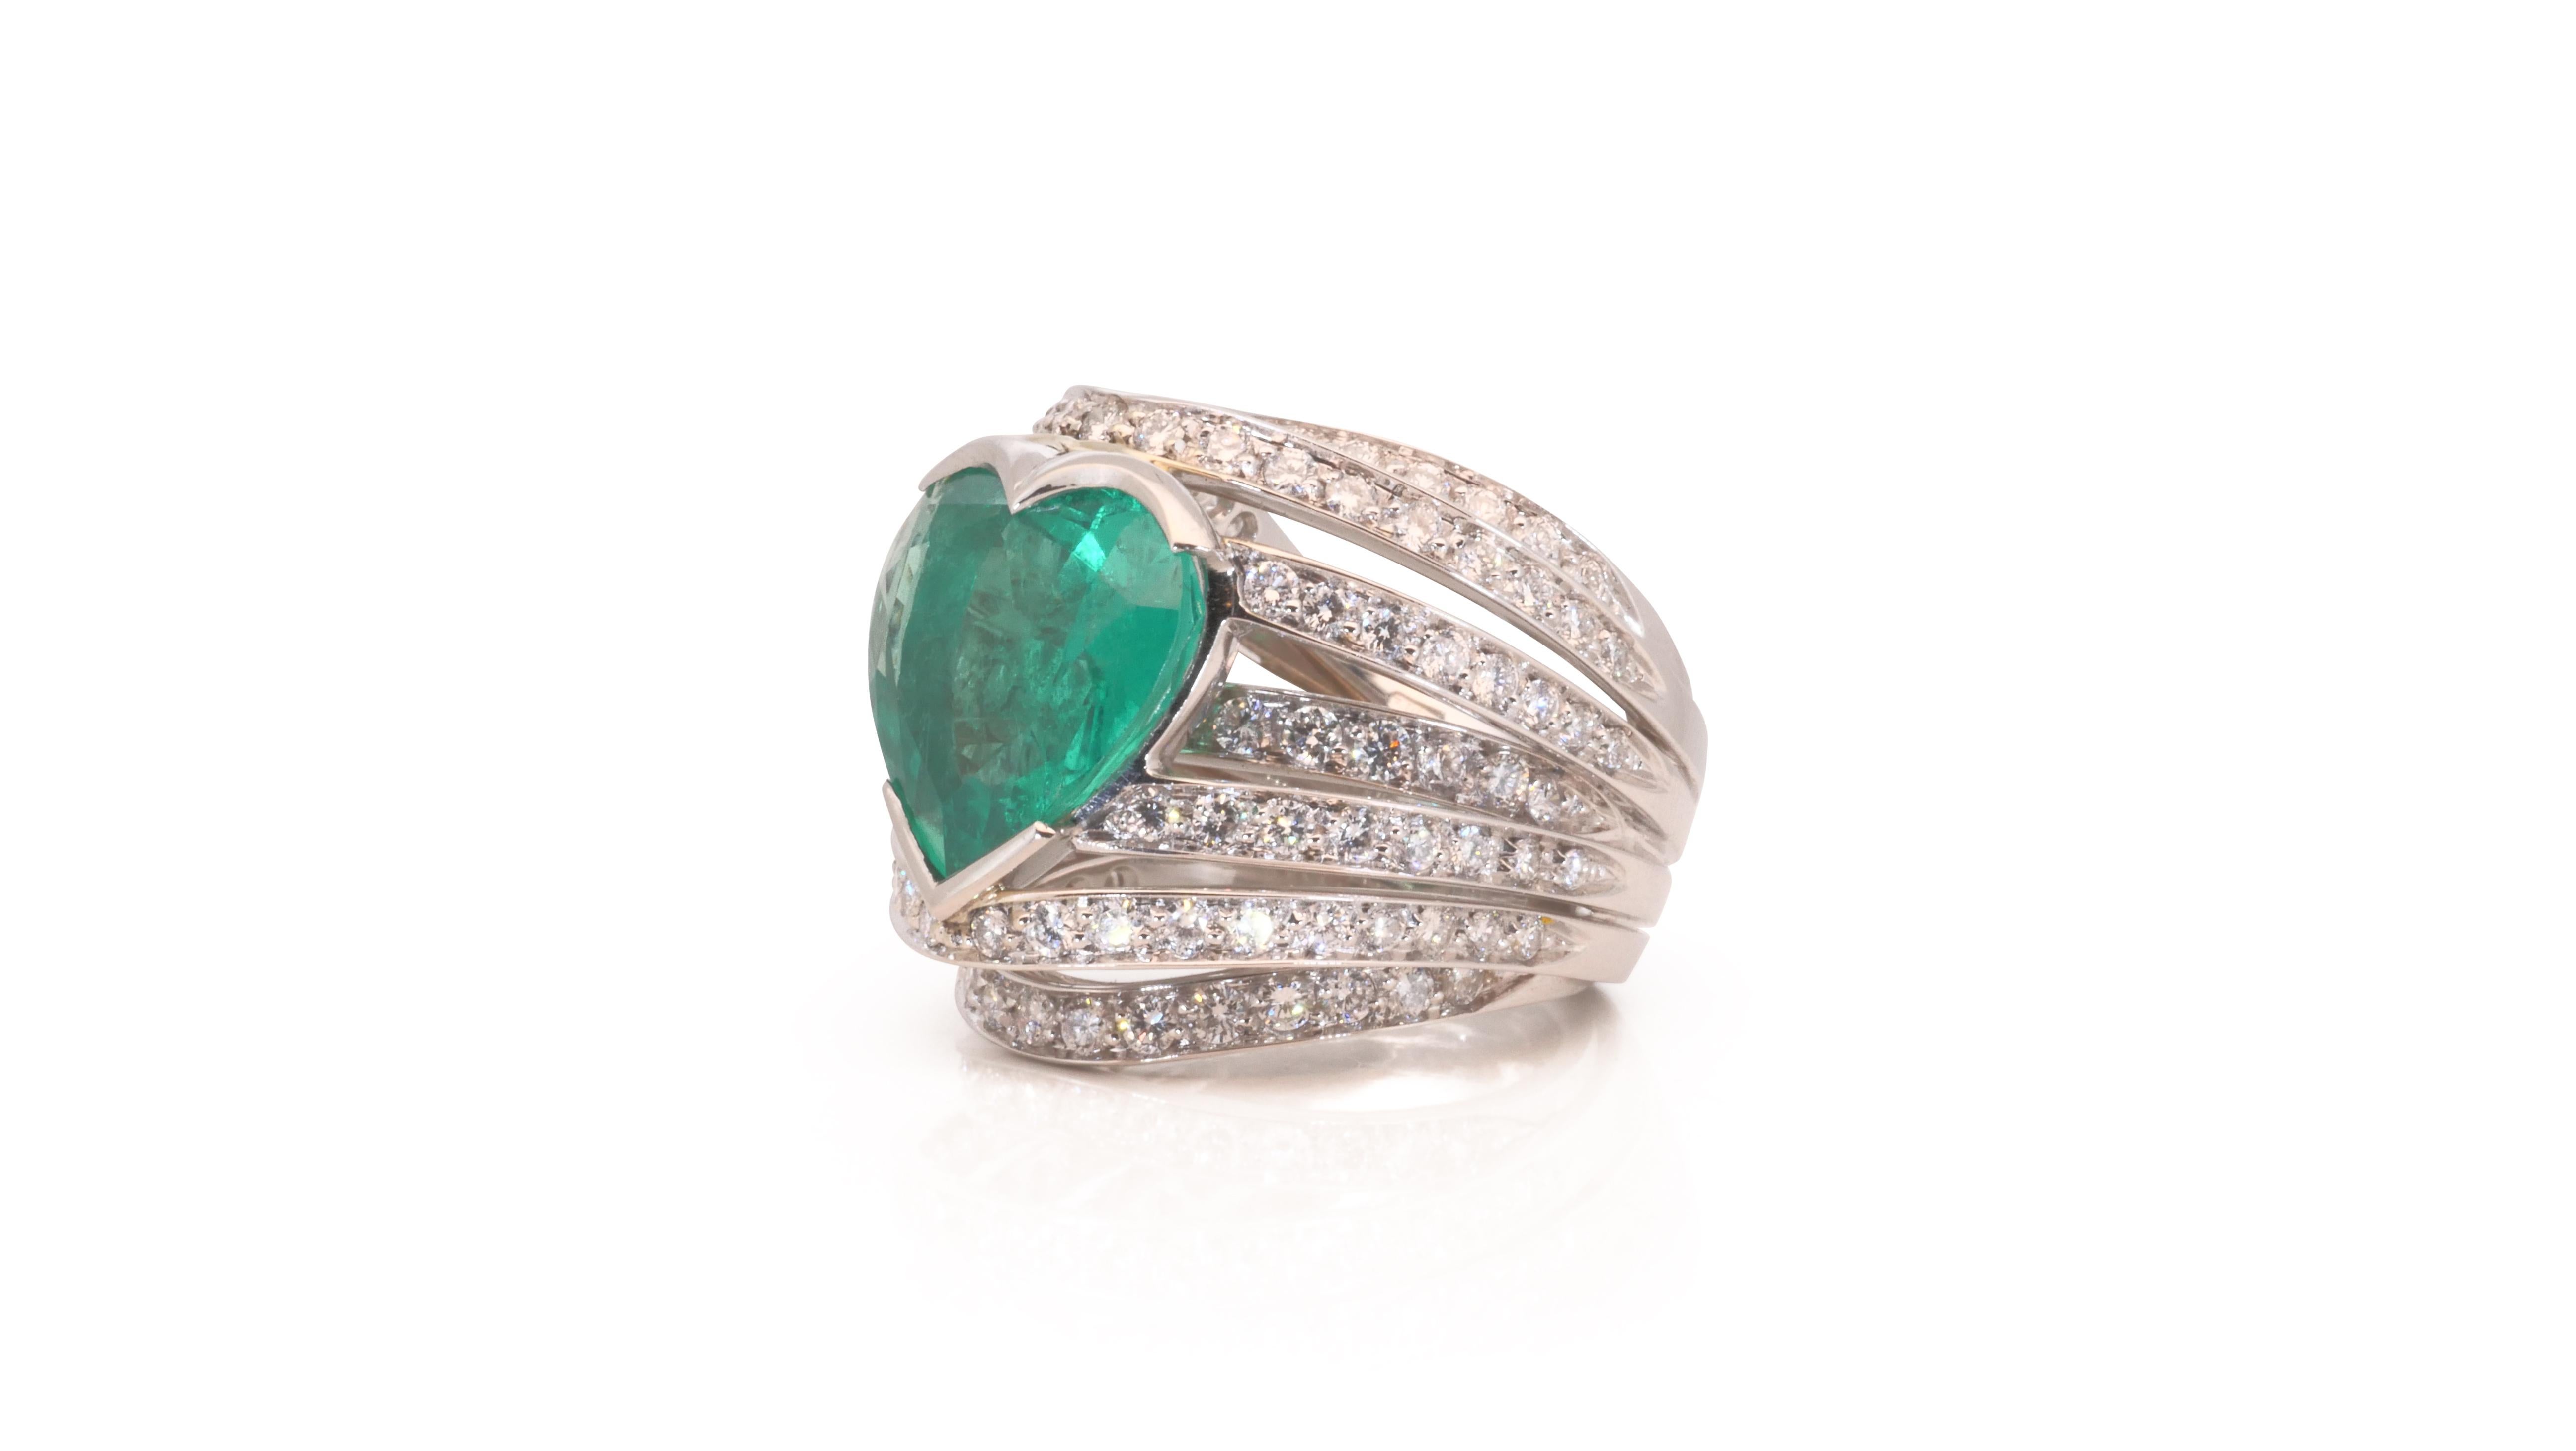 A gorgeous heart dome ring with a dazzling 6.5 carat heart natural emerald. It has 2.01 carat of side diamonds which add more to its elegance. The jewelry is made of 18k white gold with a high quality polish. It comes with GRS certificate and a